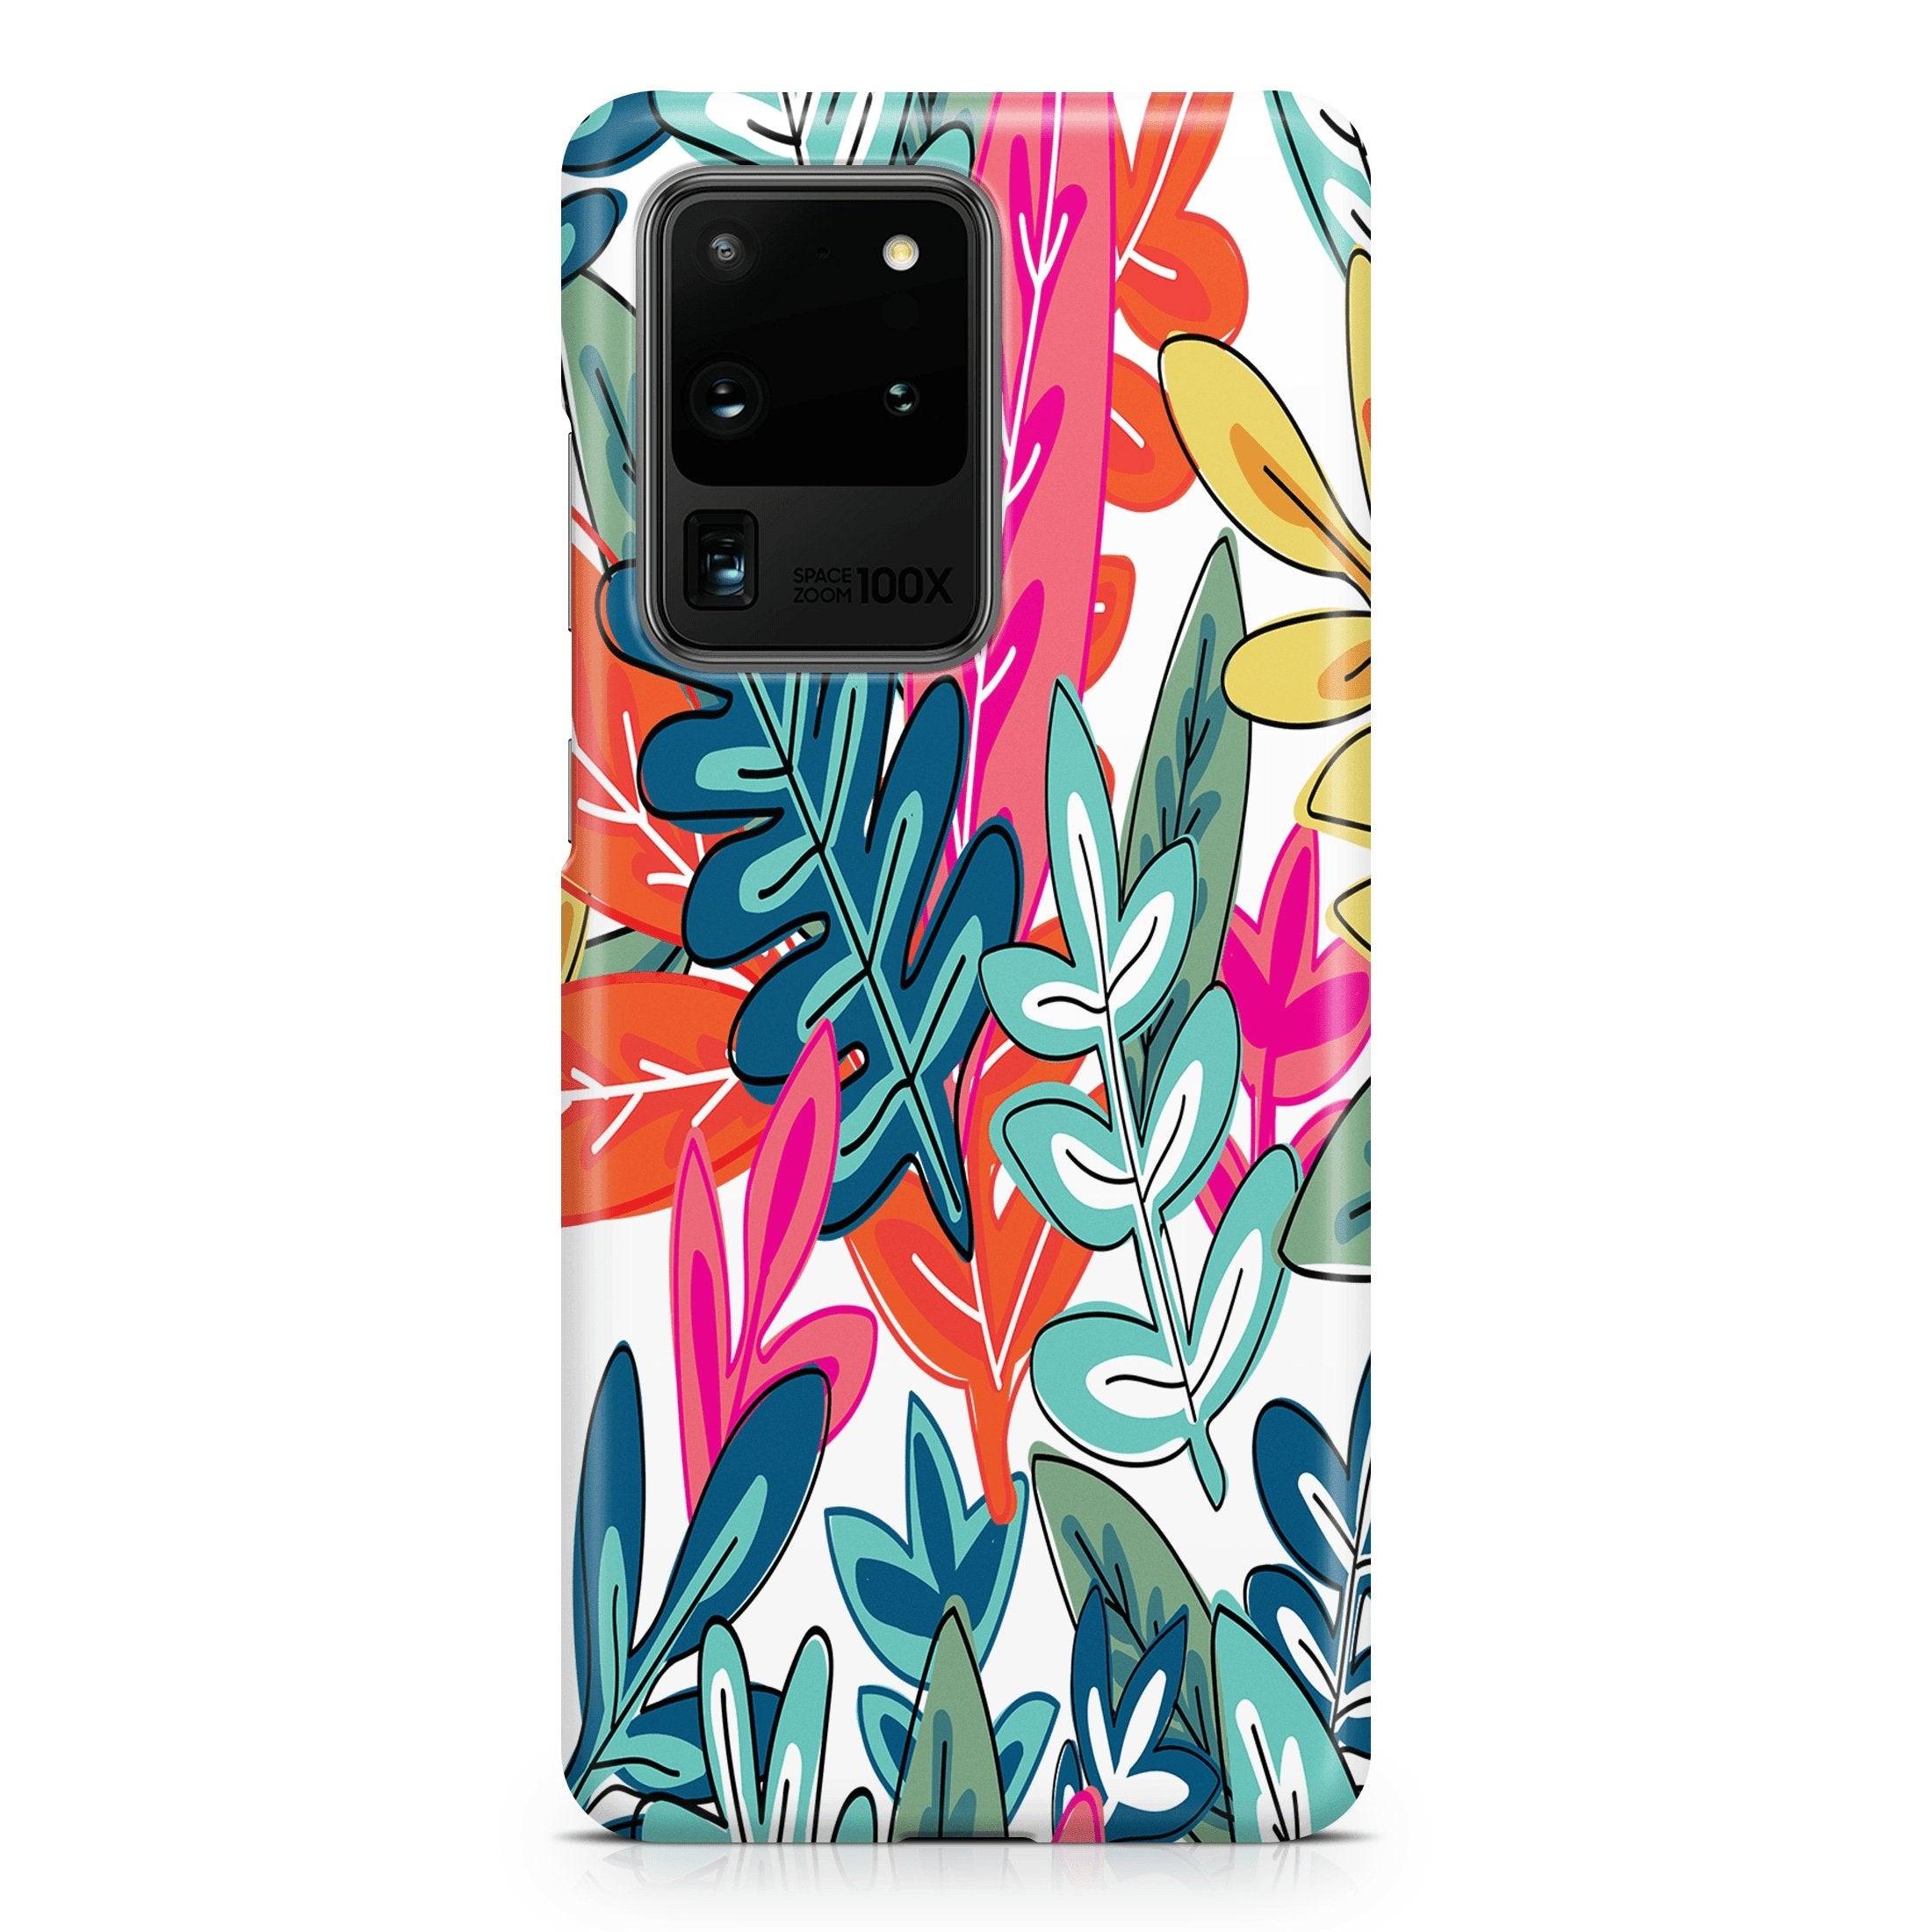 Urban Jungle - Samsung phone case designs by CaseSwagger